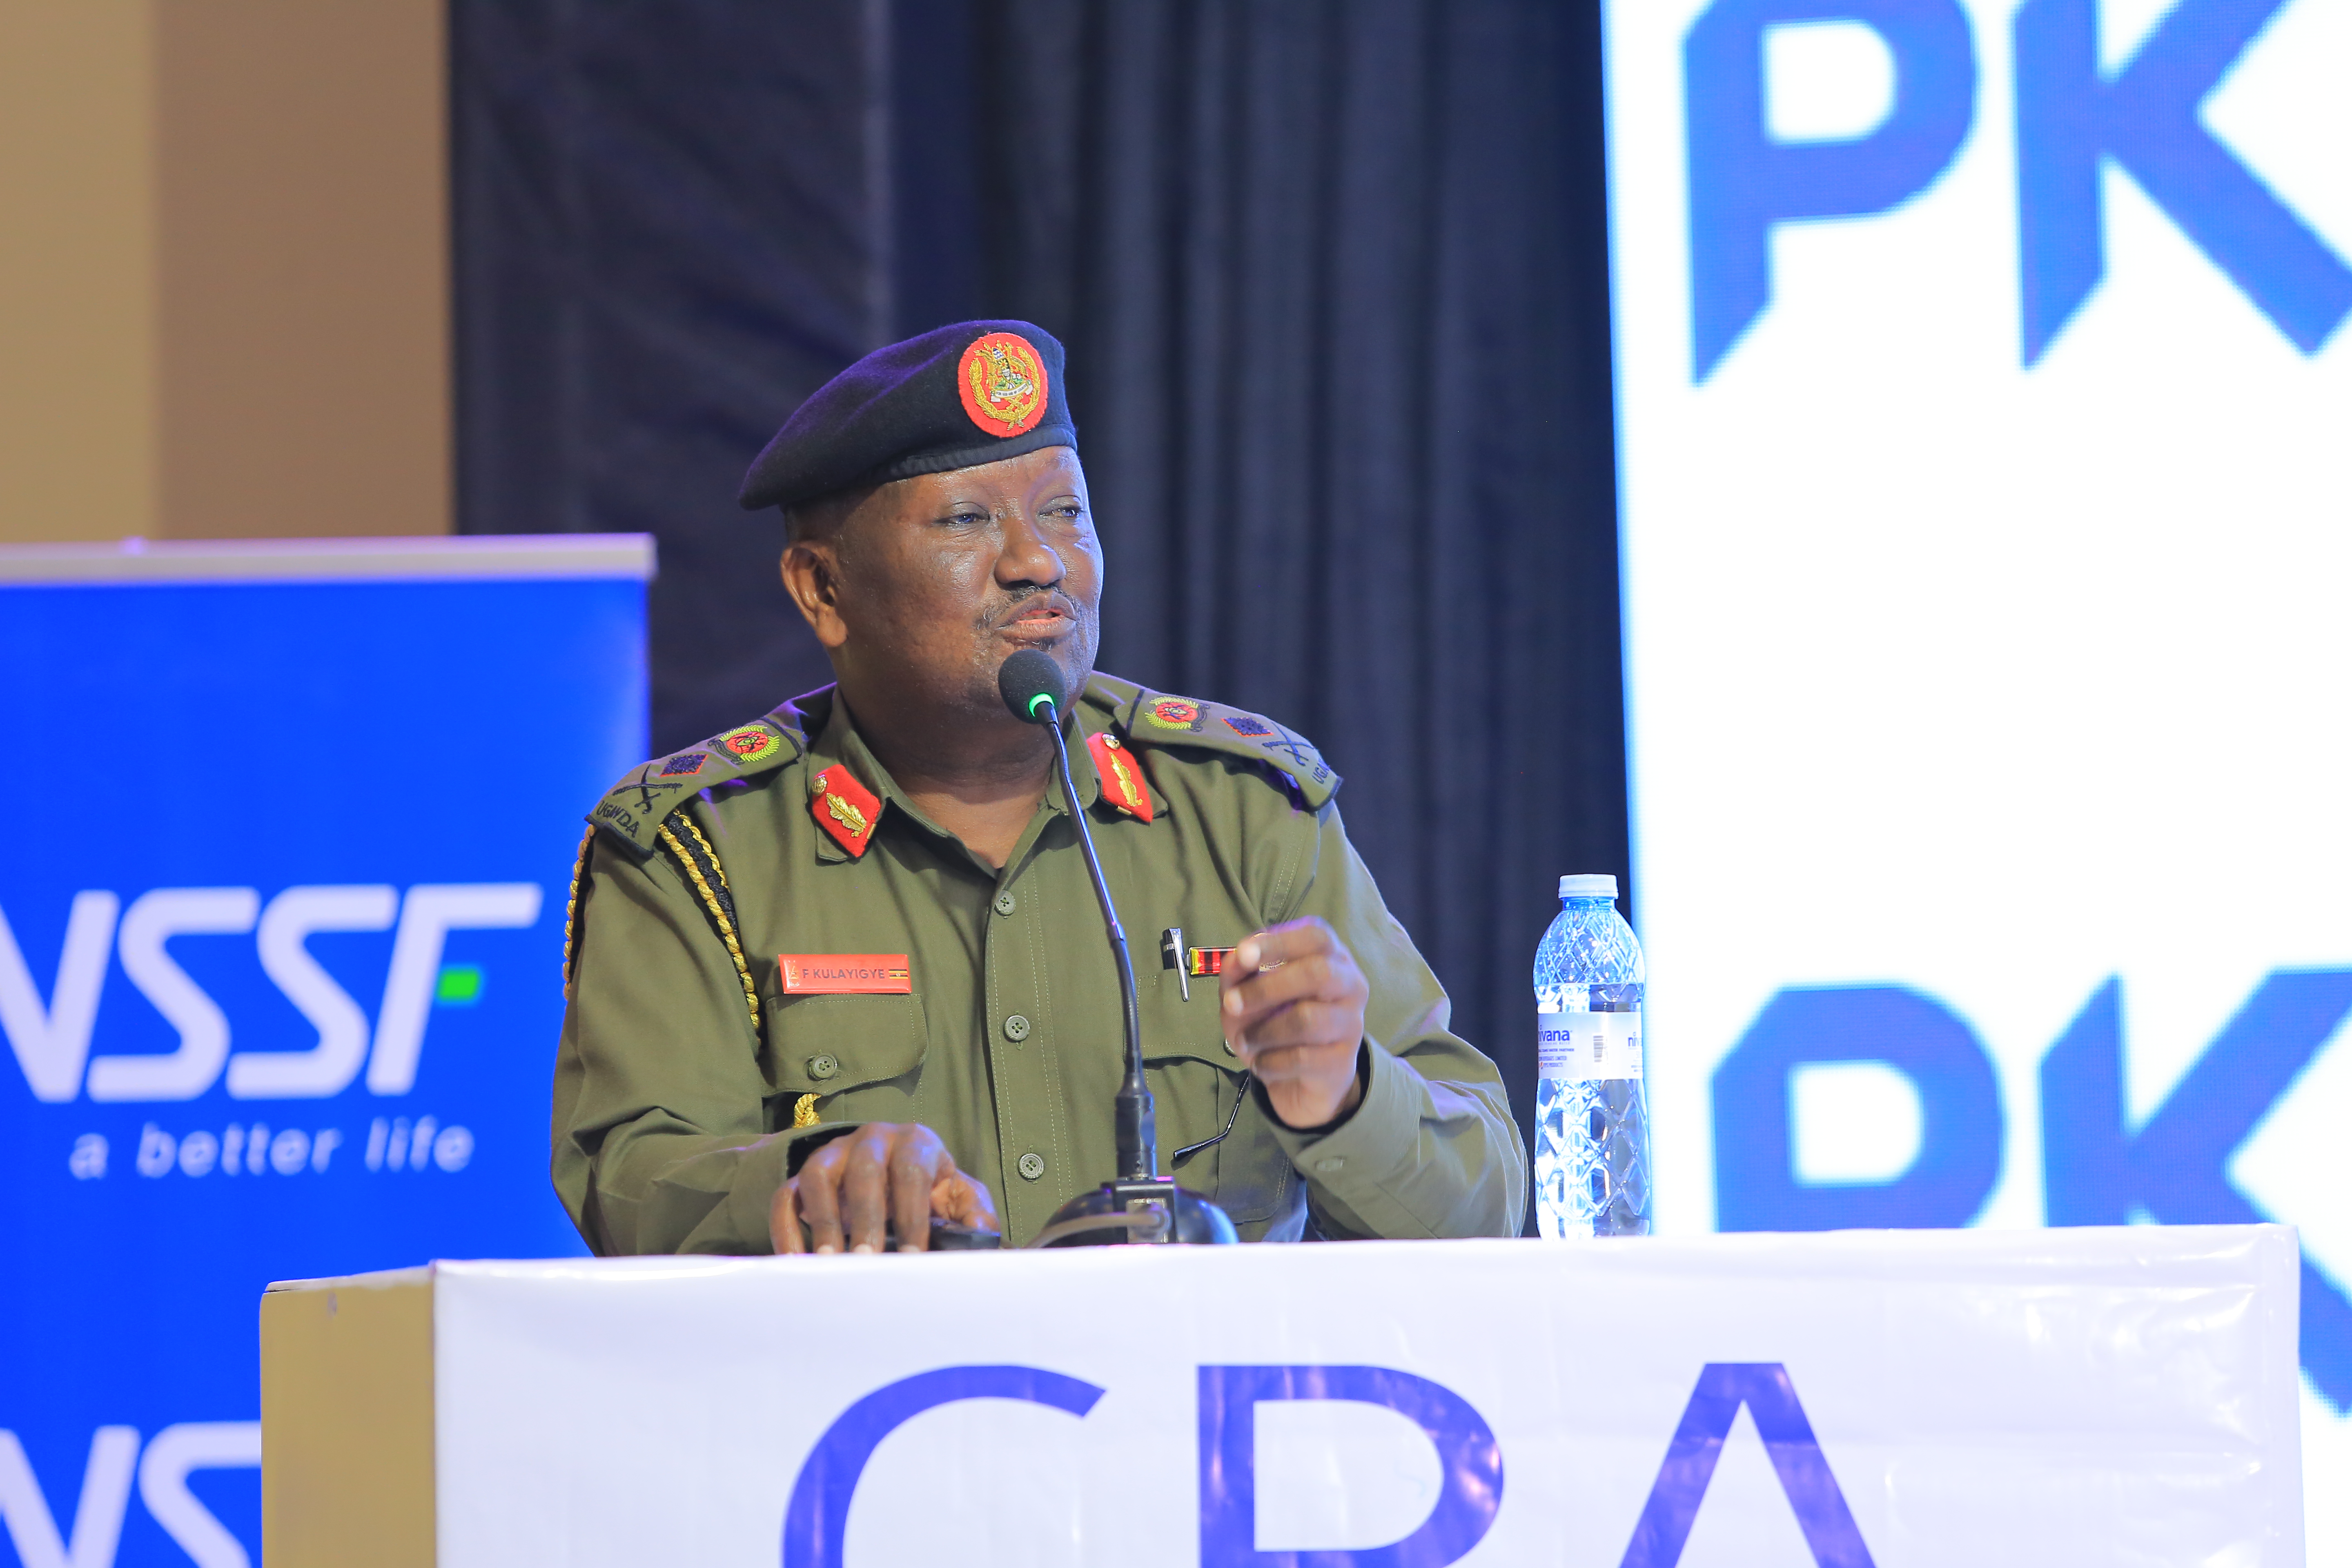 Brig. Gen. Felix Kulayigye presenting about the Role of National Security in Nation Building at the 11th CPA Economic Forum at Imperial Resort Beach Hotel, Entebbe